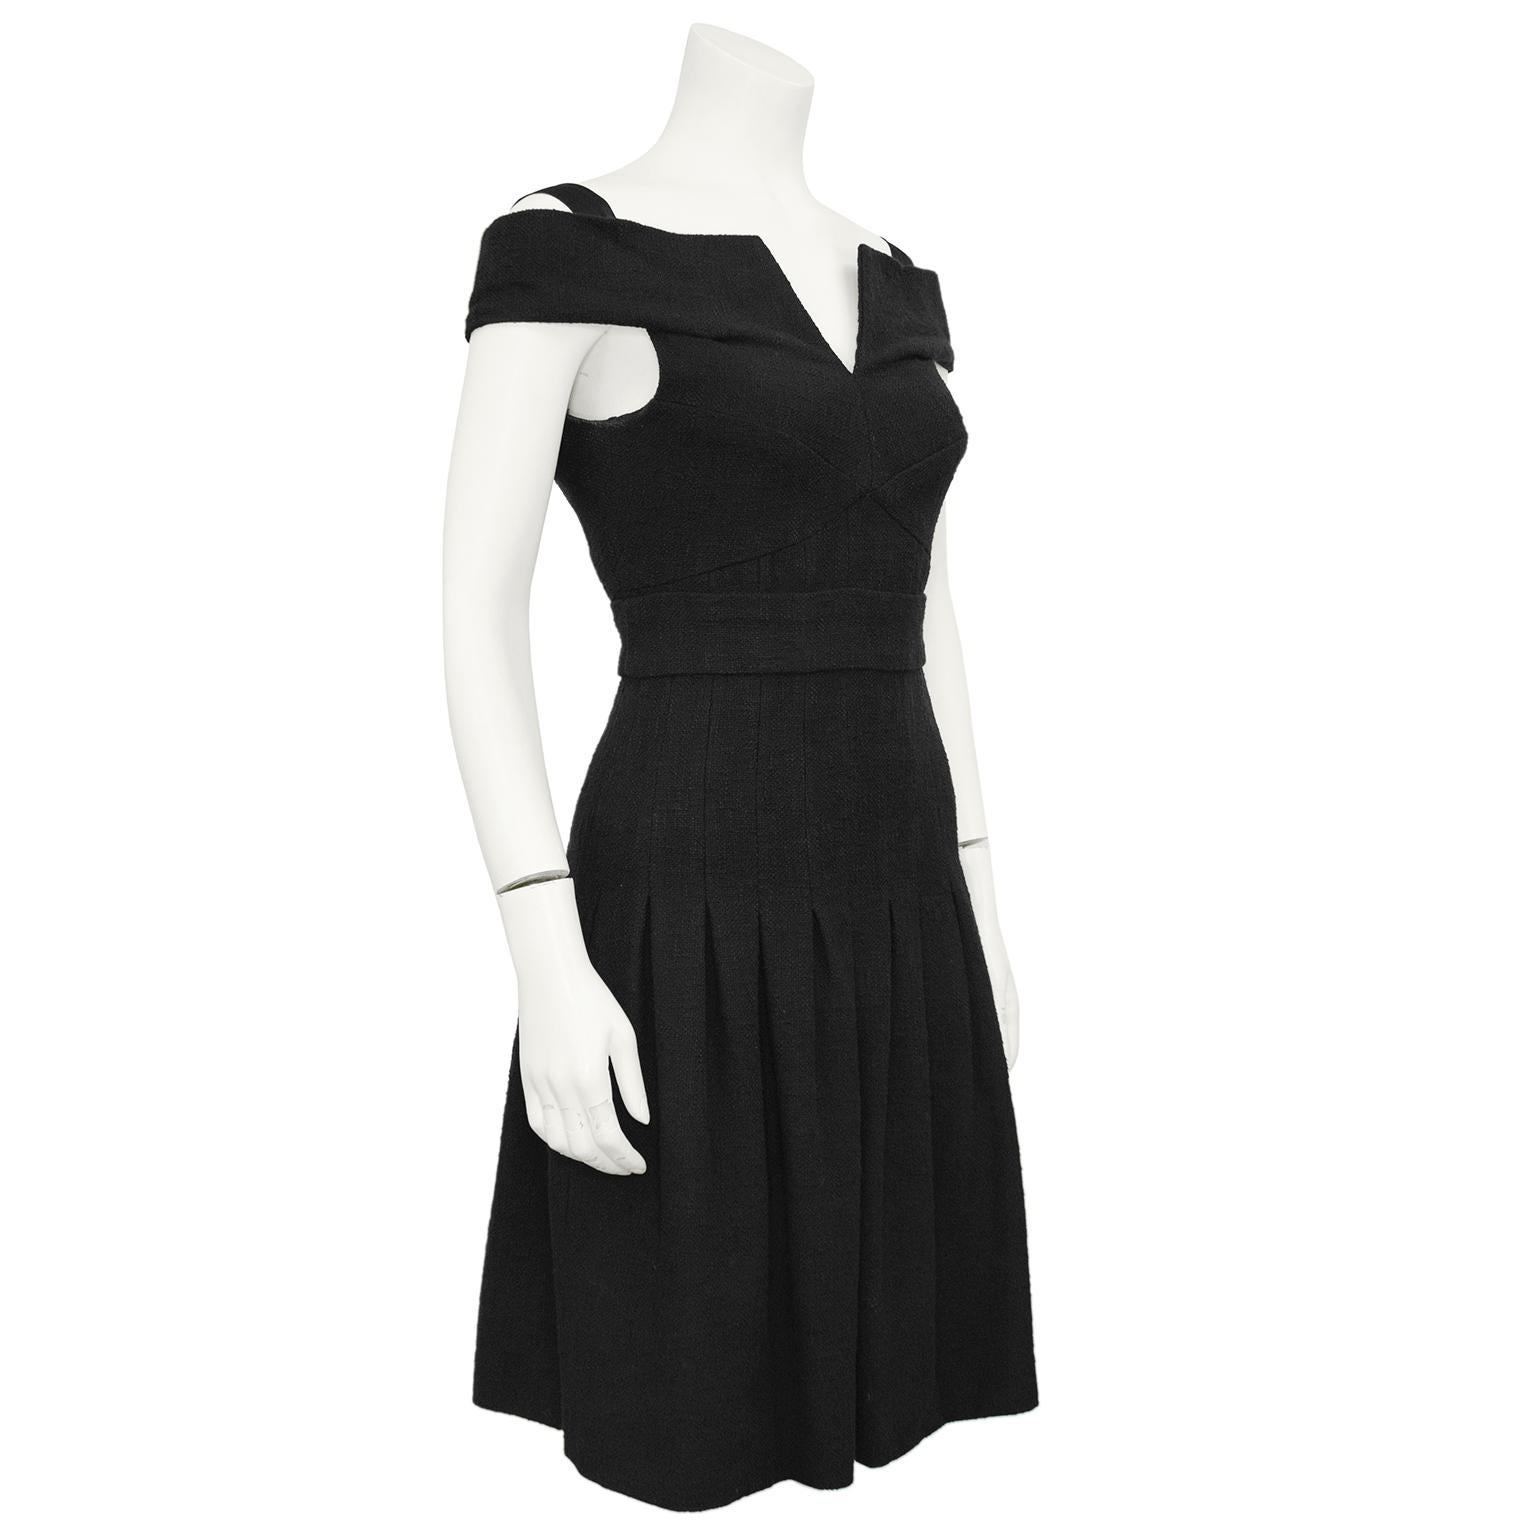 Timeless Chanel bouclé off the shoulder fitted bodice dress from the 2007 Cruise collection. V-neck opening enhanced by a similar V opening at the back above the zipper. Chanel black enamel CC logo buttons give the faux shawl collar a finished look.